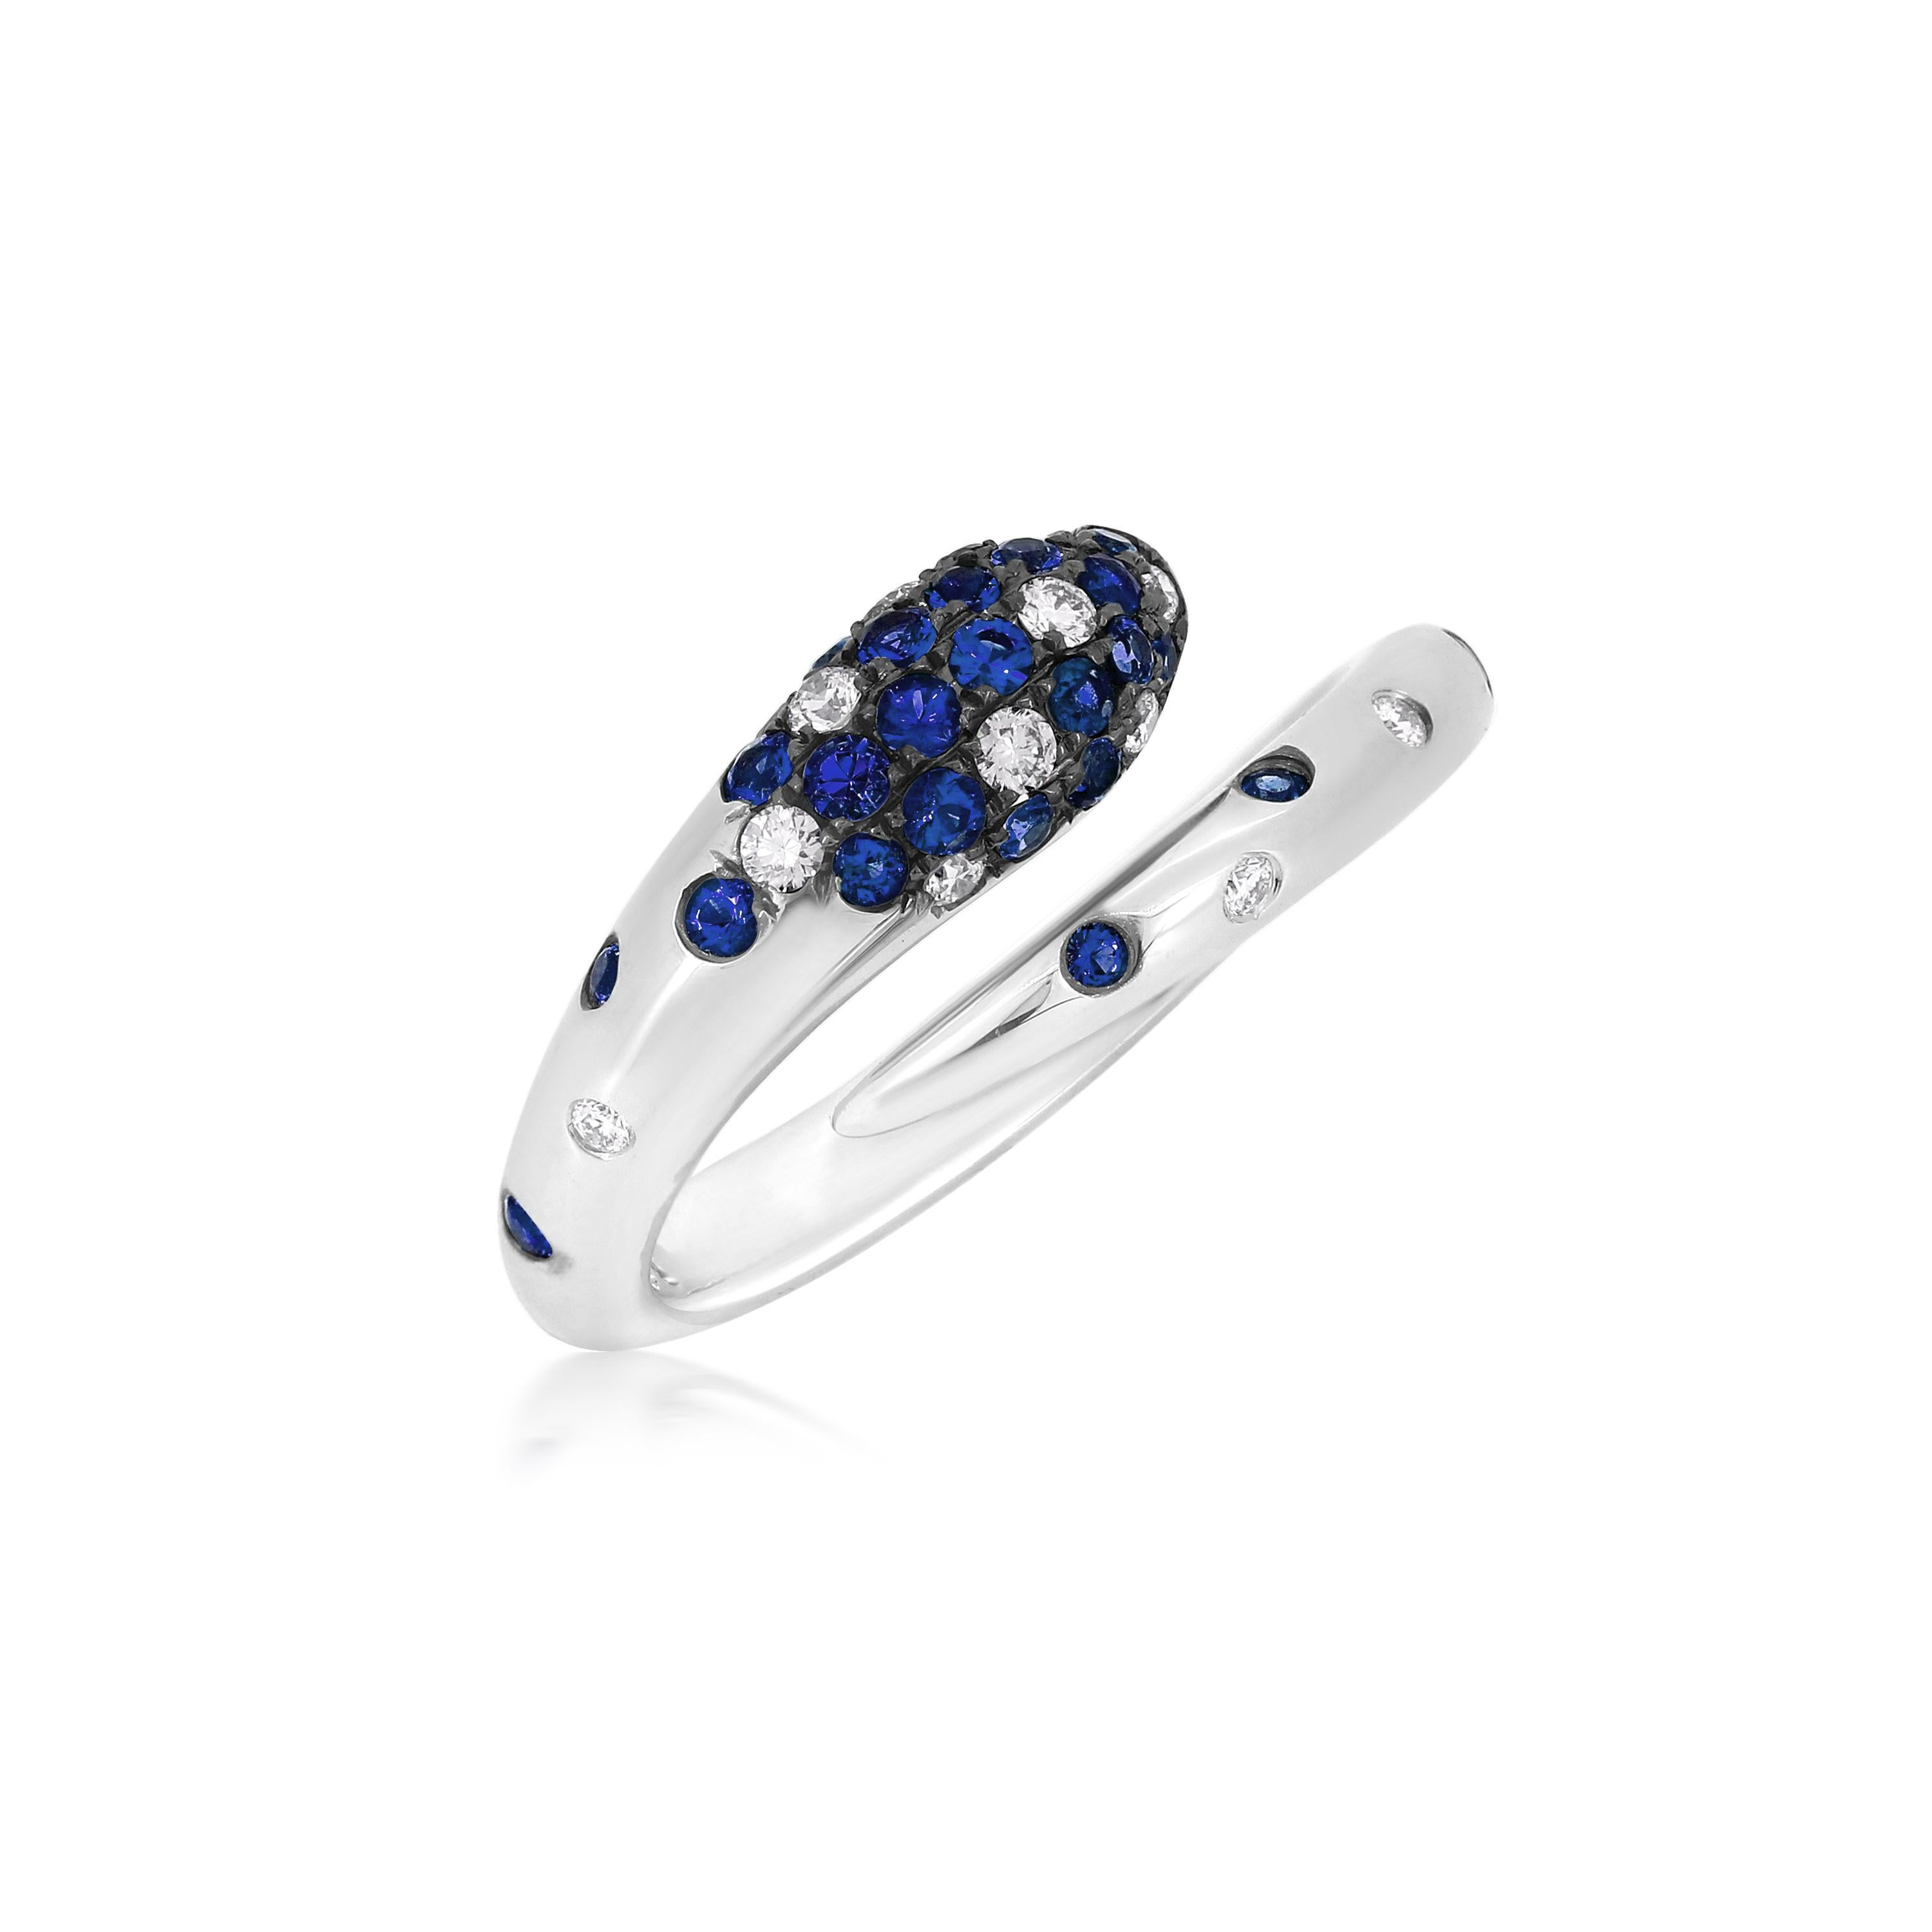  Elevate your style with the Luxle 0.53 Cttw. Blue Sapphire and Diamond Bypass Serpent Ring in 18k White Gold—an exquisite embodiment of elegance and artistry. This captivating serpent ring captures the essence of mystique and sophistication, making